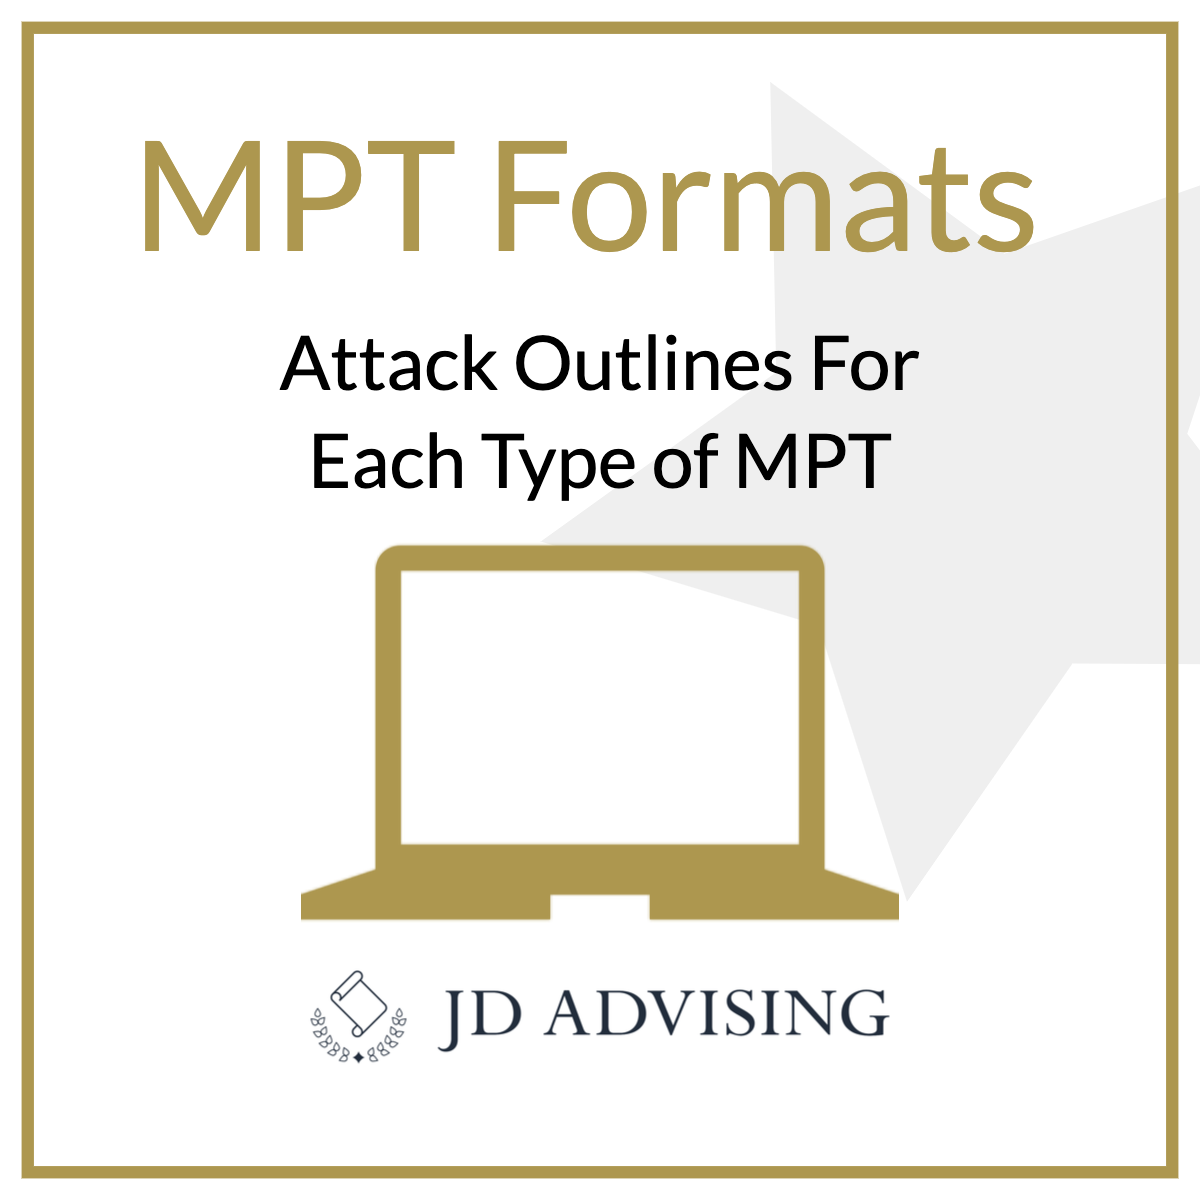 MPT formats attack outlines for each type of MPT